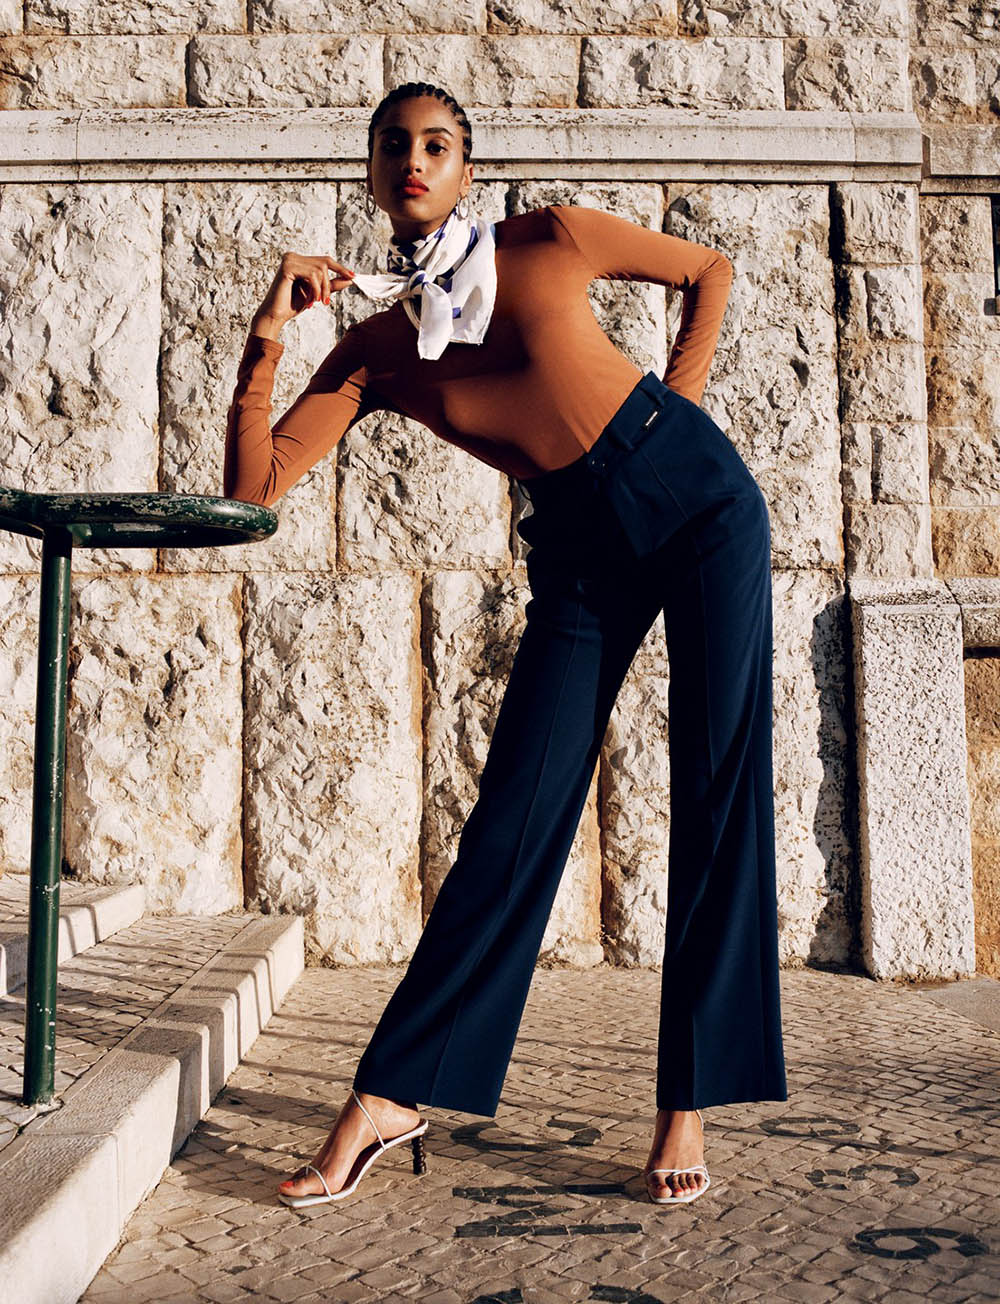 Imaan Hammam by Angelo Pennetta for British Vogue May 2019